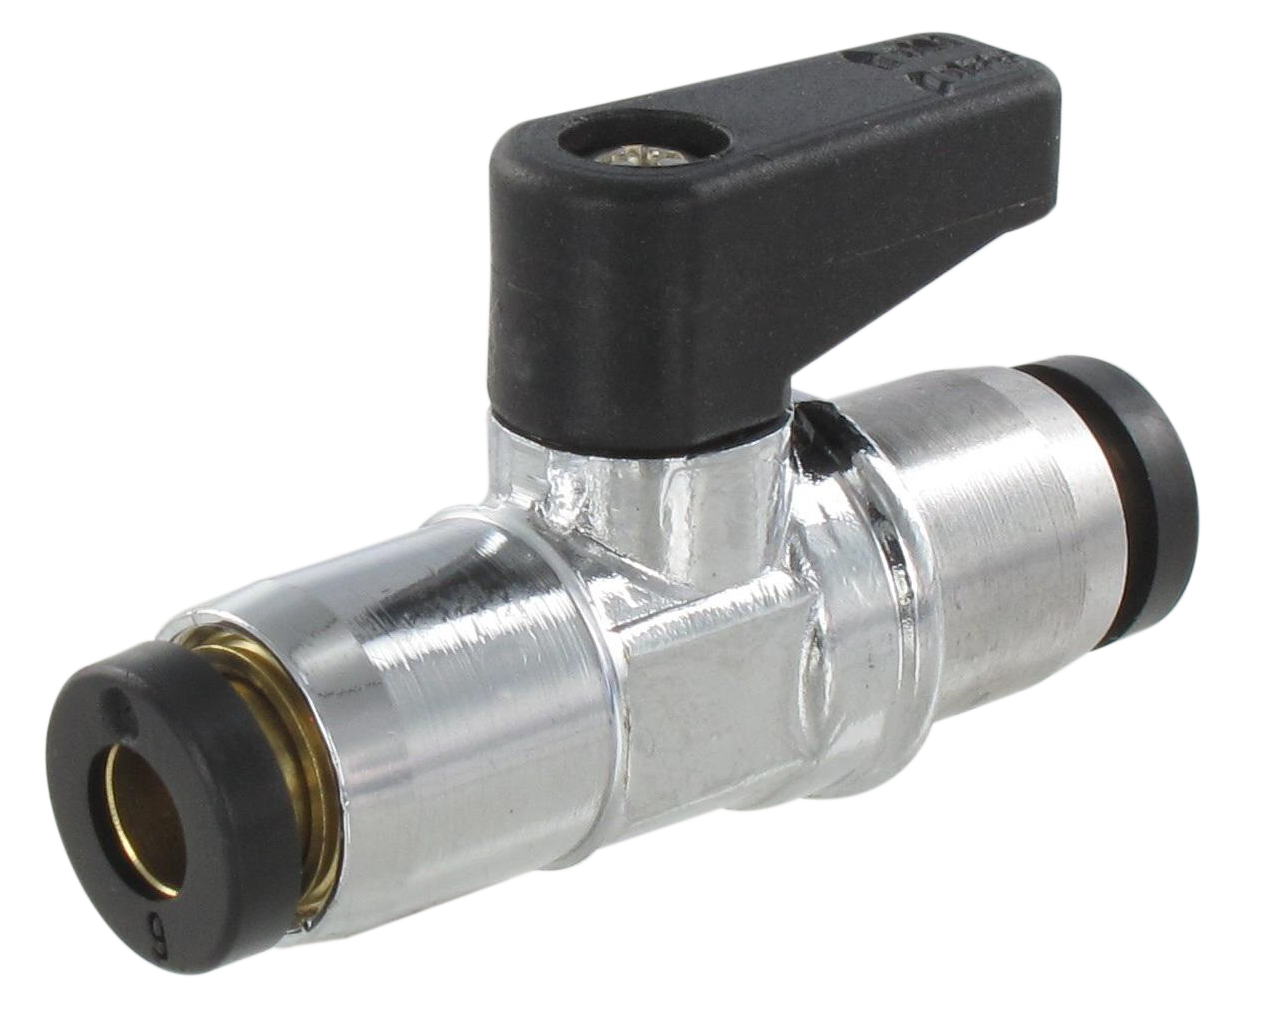 Push-in connections ball valve T6 Nickel-plated brass ball valves